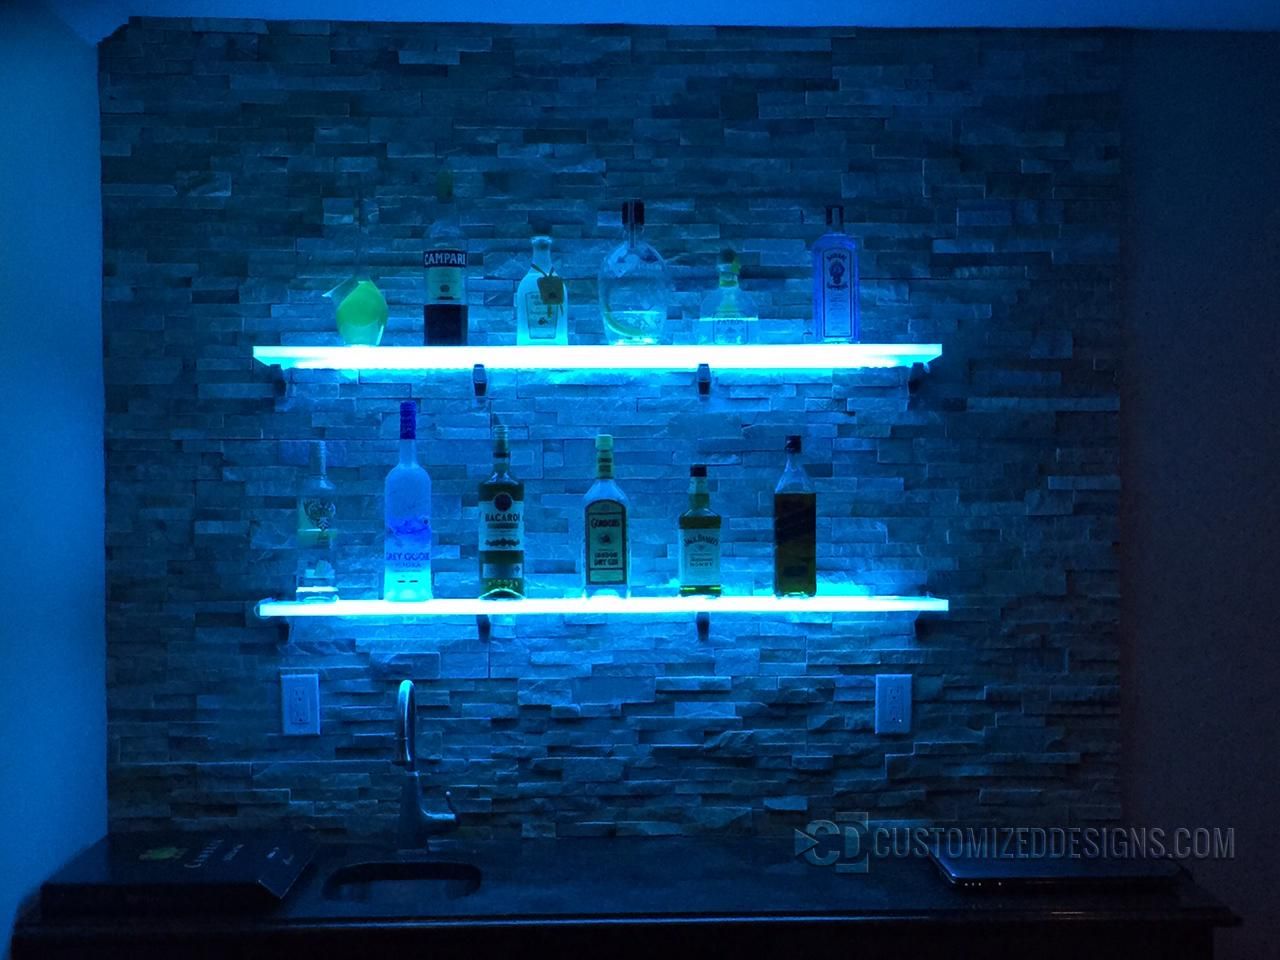 lighted display shelving for bars nightclubs restaurants and more floating bar shelves with lights led glass gallery customized designs kitchen cabinet systems large cart bunnings